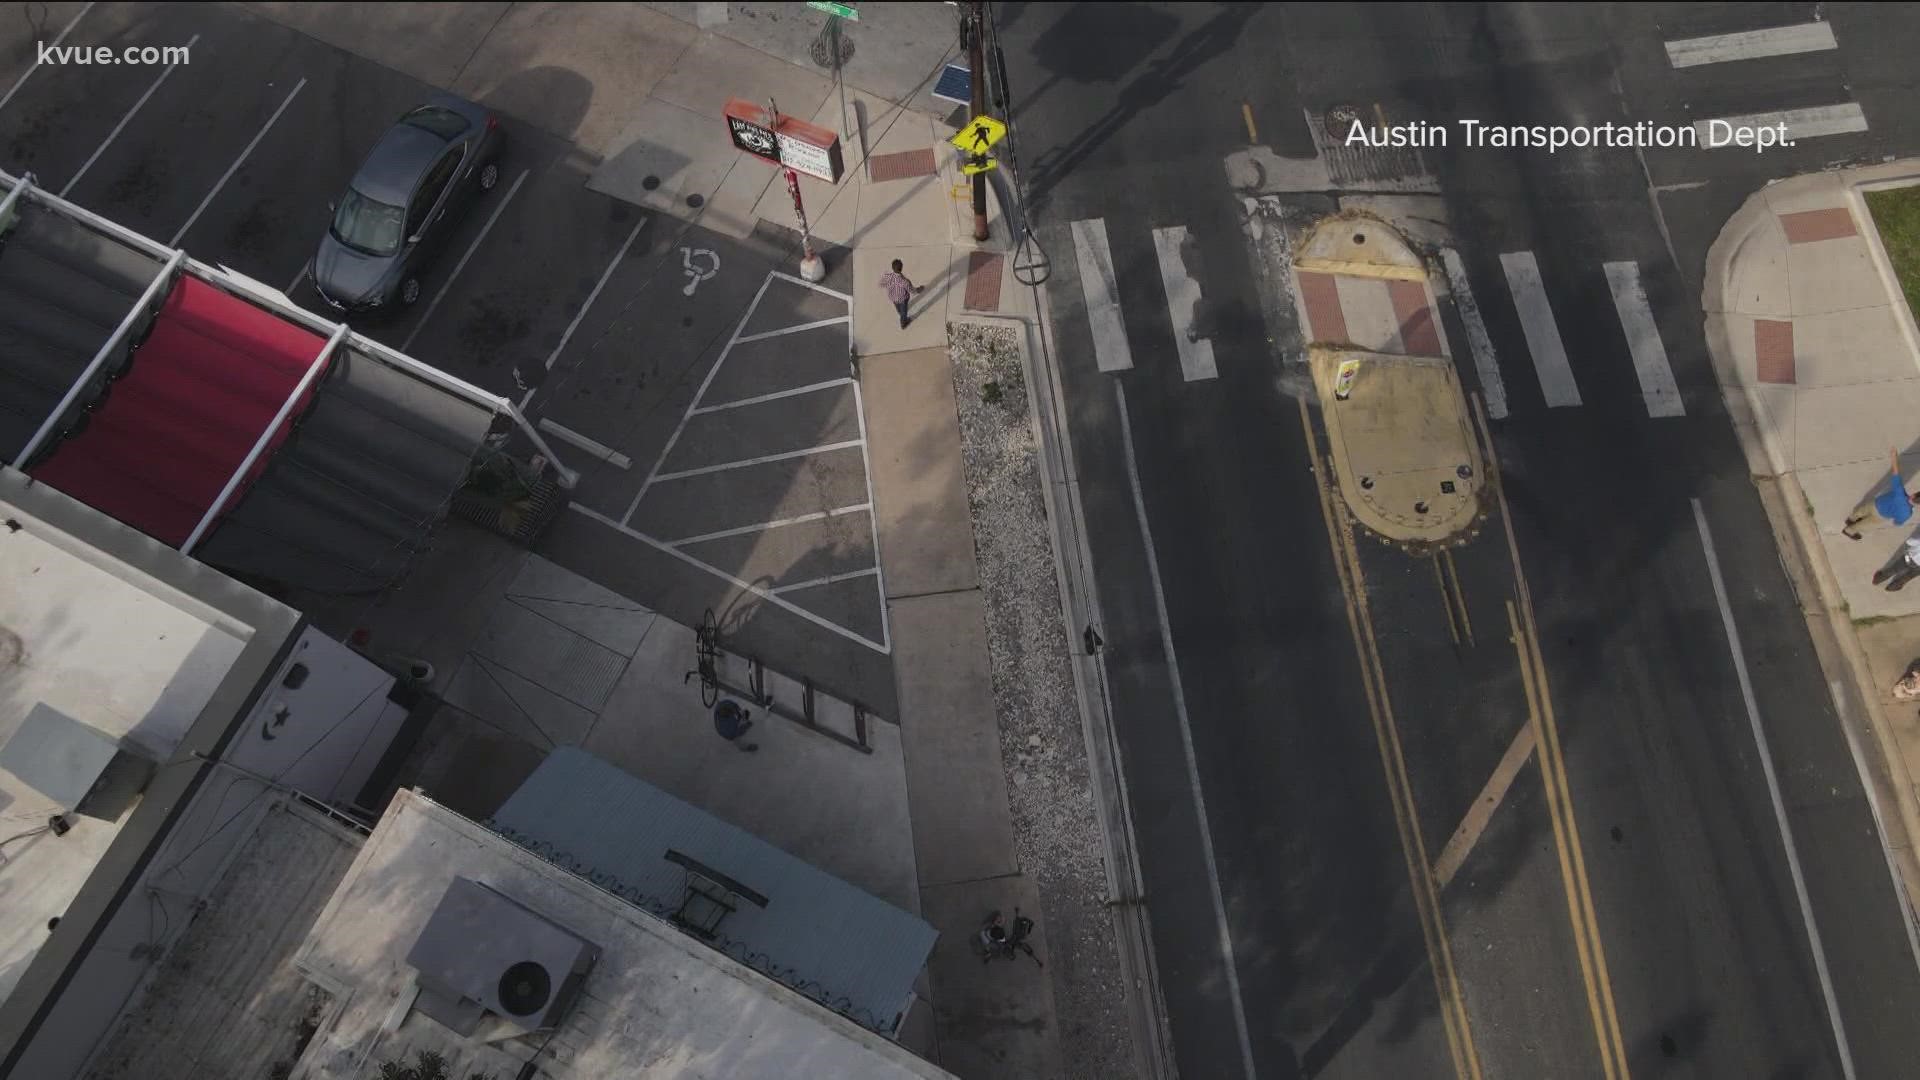 An Austin crosswalk is going high-tech! The new technology being tested could lead to safer roads across the city.